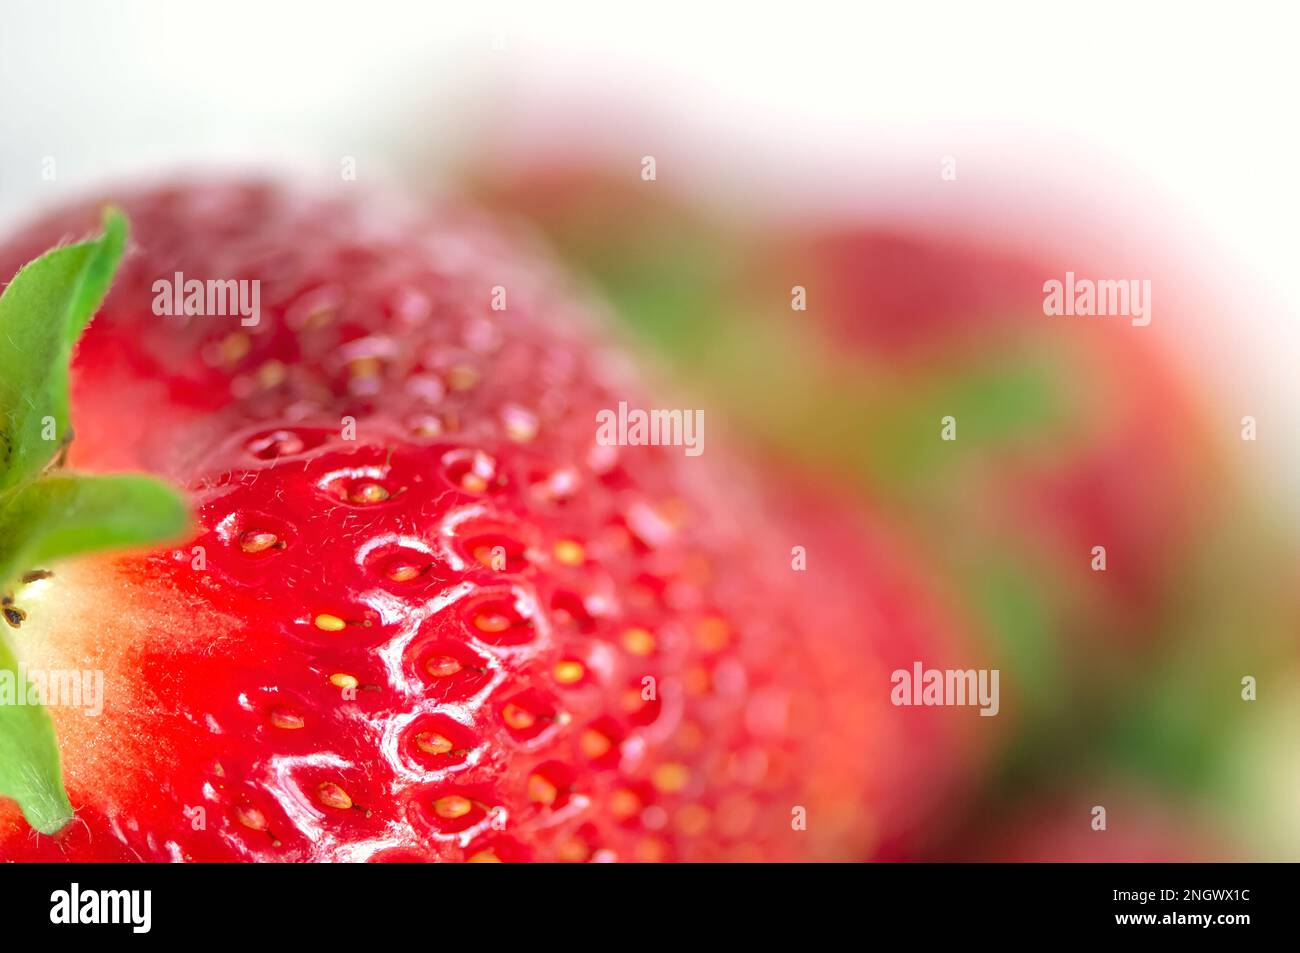 Strawberry with stem (Fragaria x ananassa) Everbearing - whole - fresh - closeup - copy space. Stock Photo